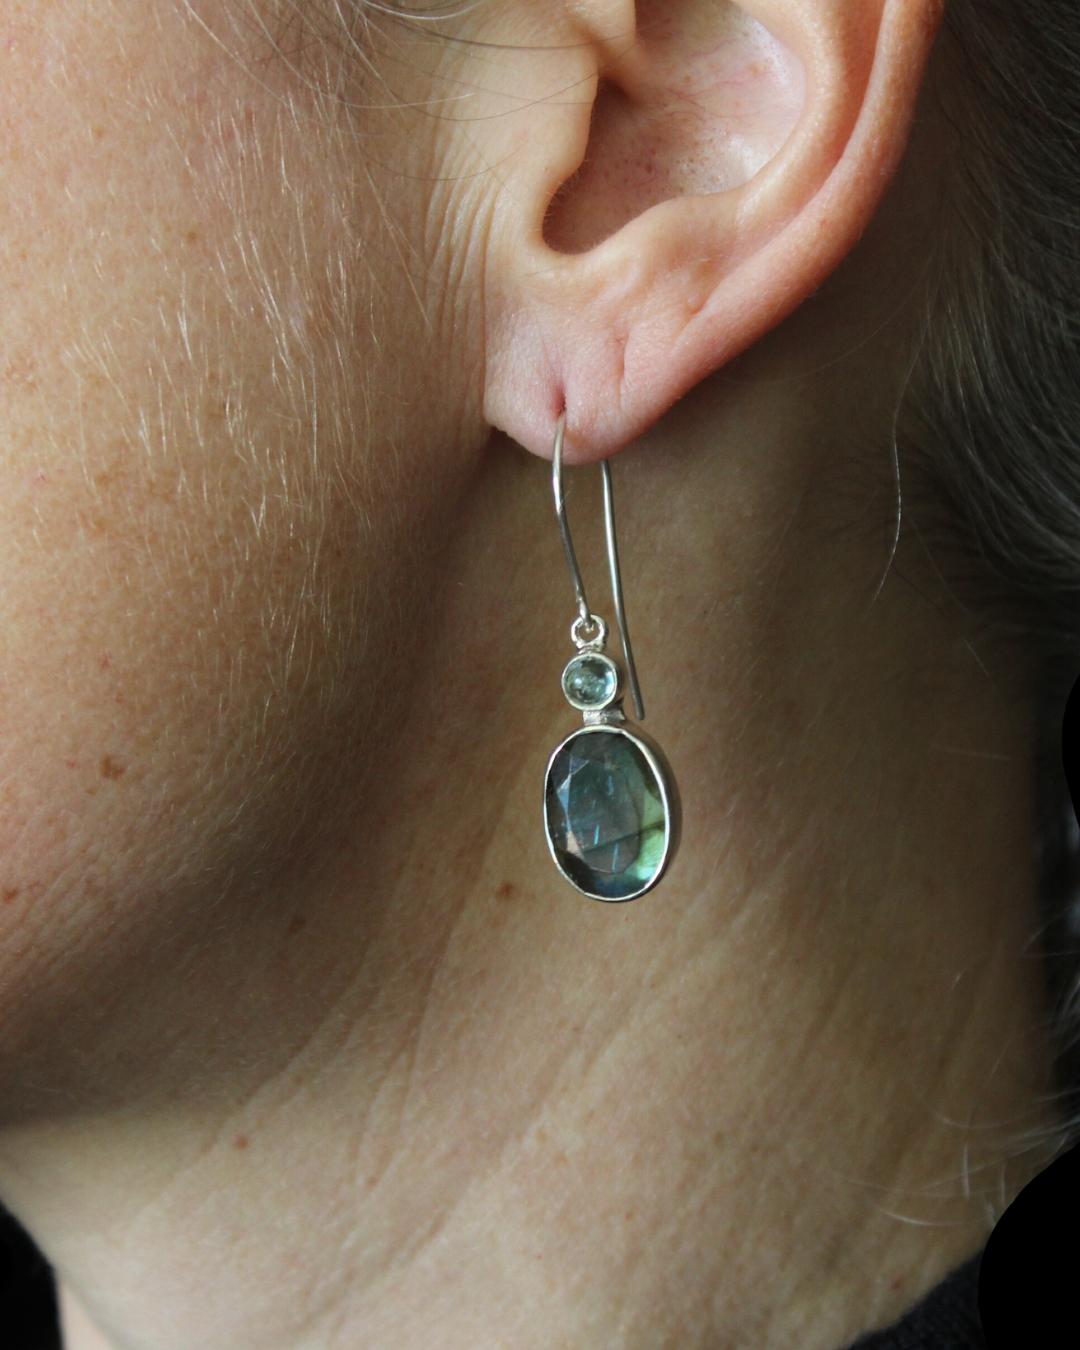 These pretty earrings feature faceted labradorite cabochons complimented by light blue, round aquamarine accent stones. Labradorite is displays an iridescent effect, which is even more pronounced when the stone is faceted. They hang gracefully with